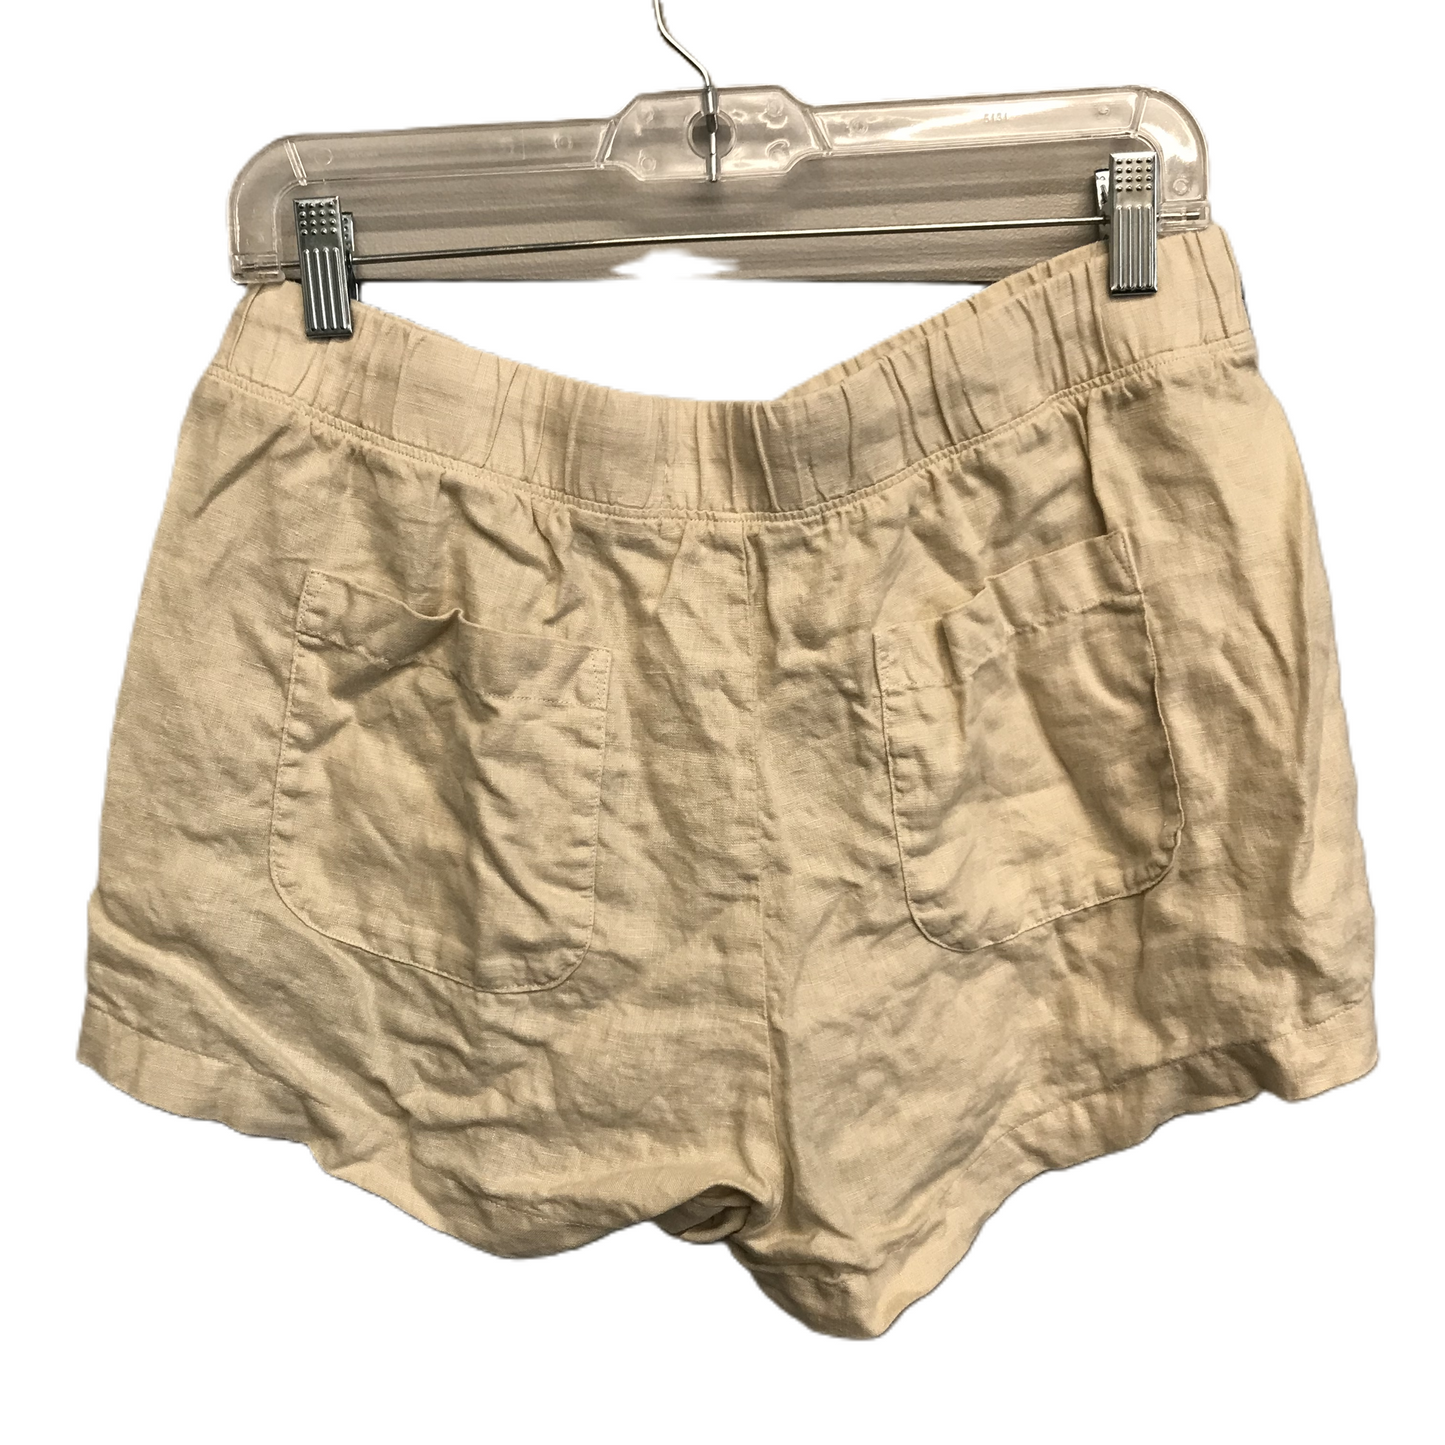 Tan Shorts By Cloth & Stone, Size: 10